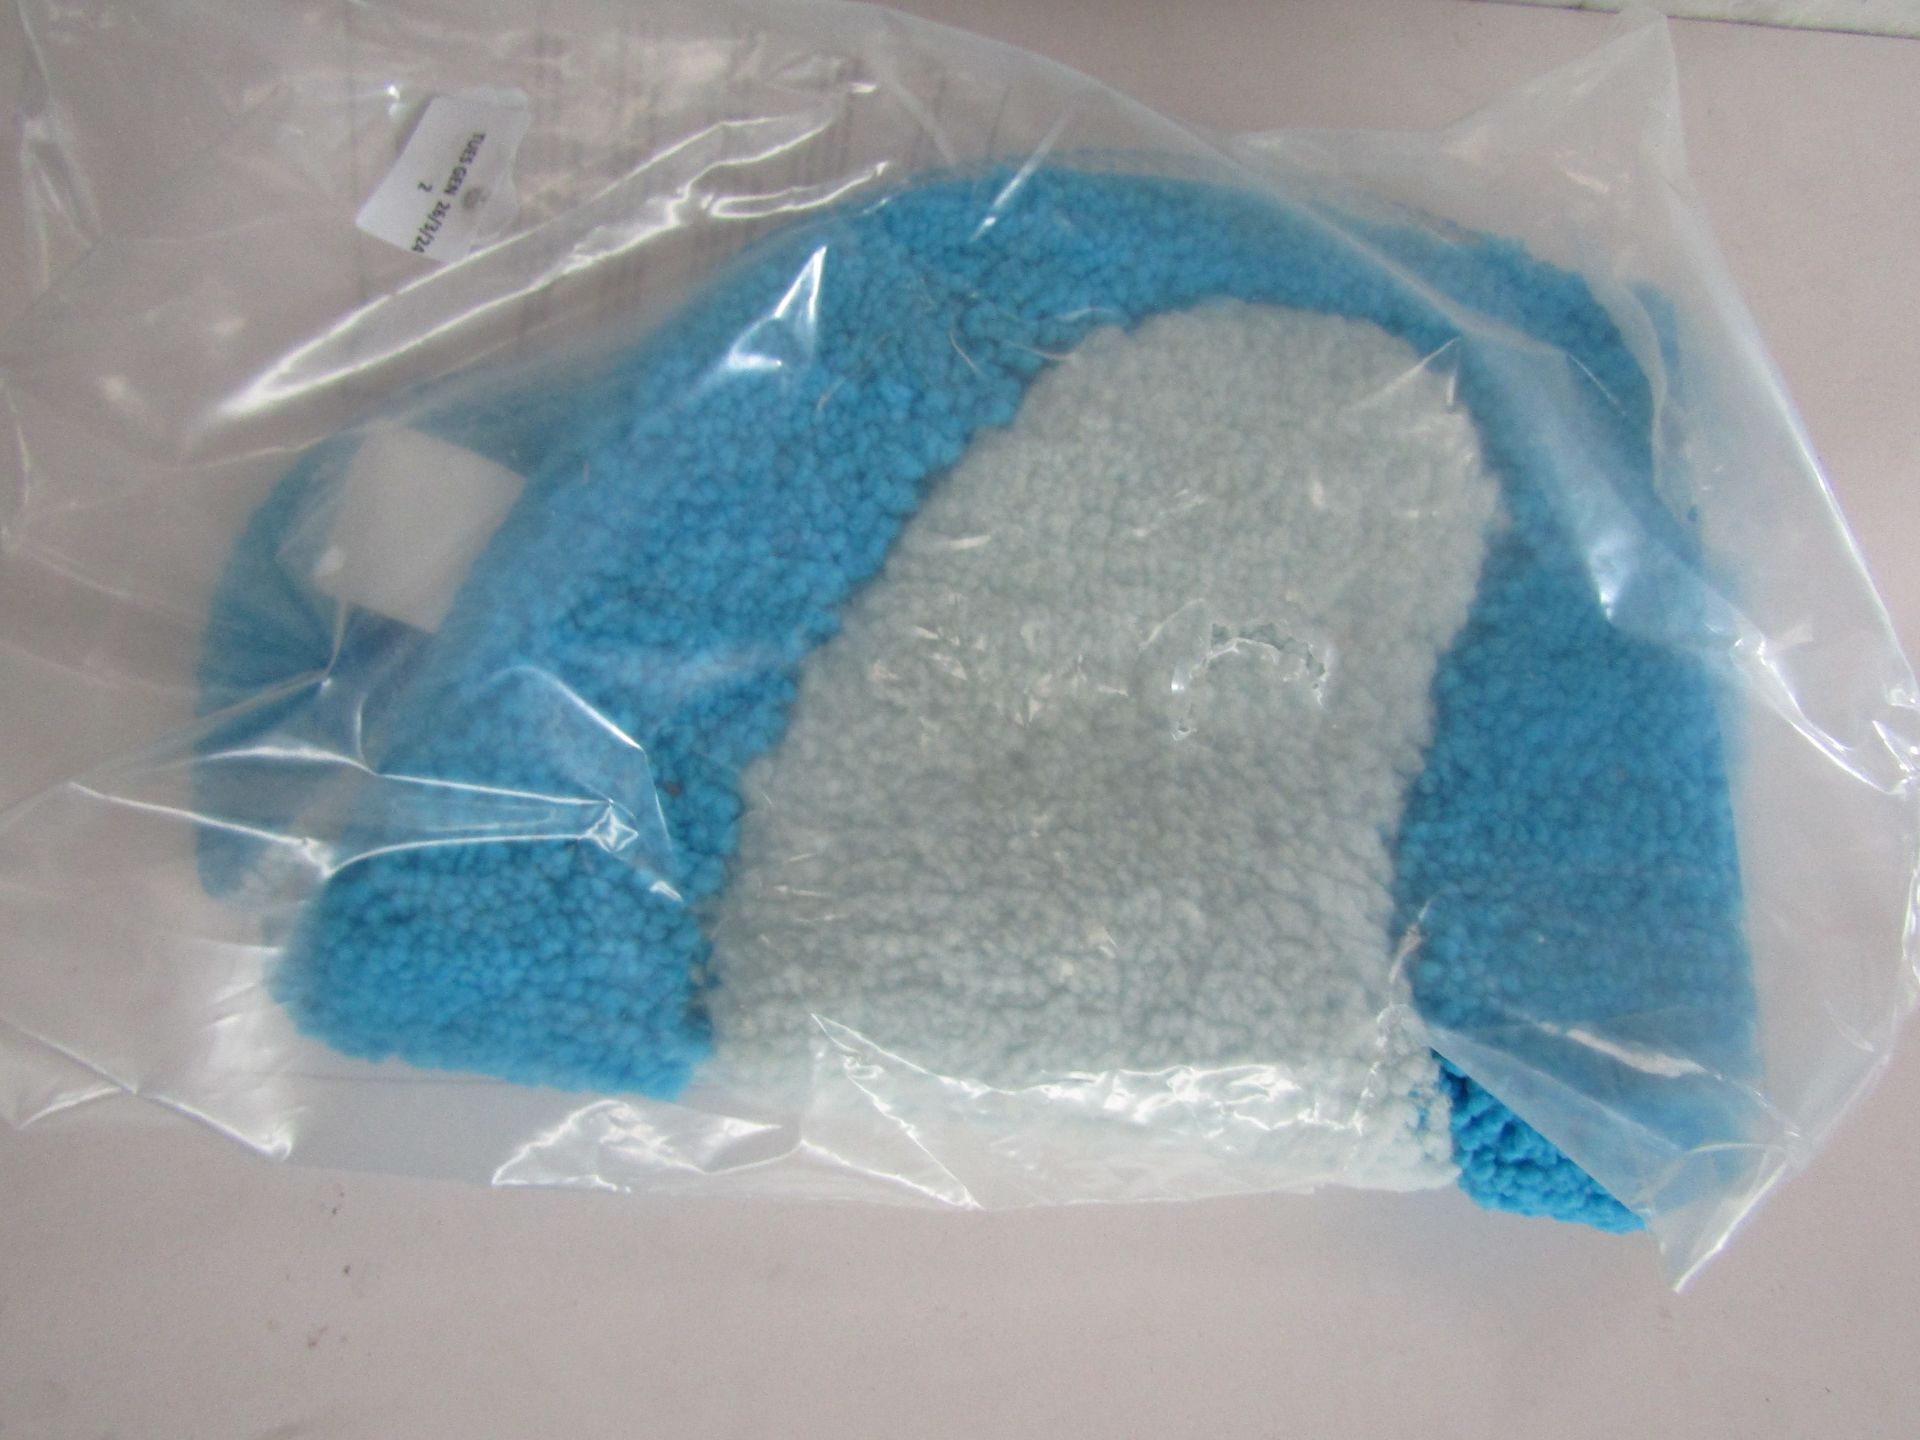 Blue & White Paw Print Rug - Packaged.